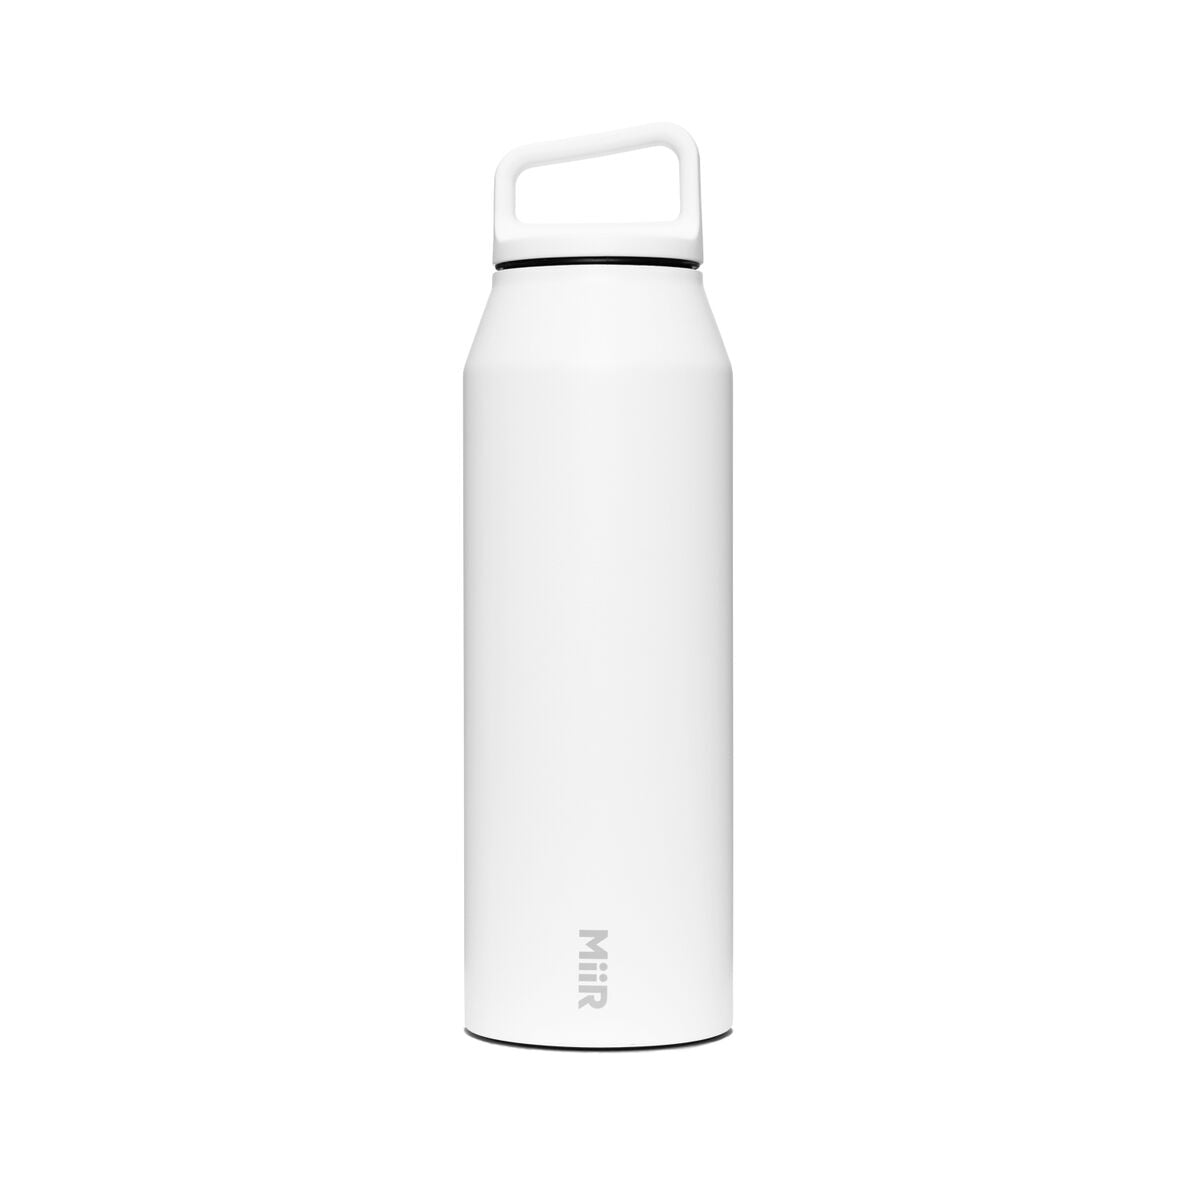 MiiR, Wide Mouth Water Bottle, Vacuum Insulated Leakproof, Stainless Steel Construction, White, 16 oz